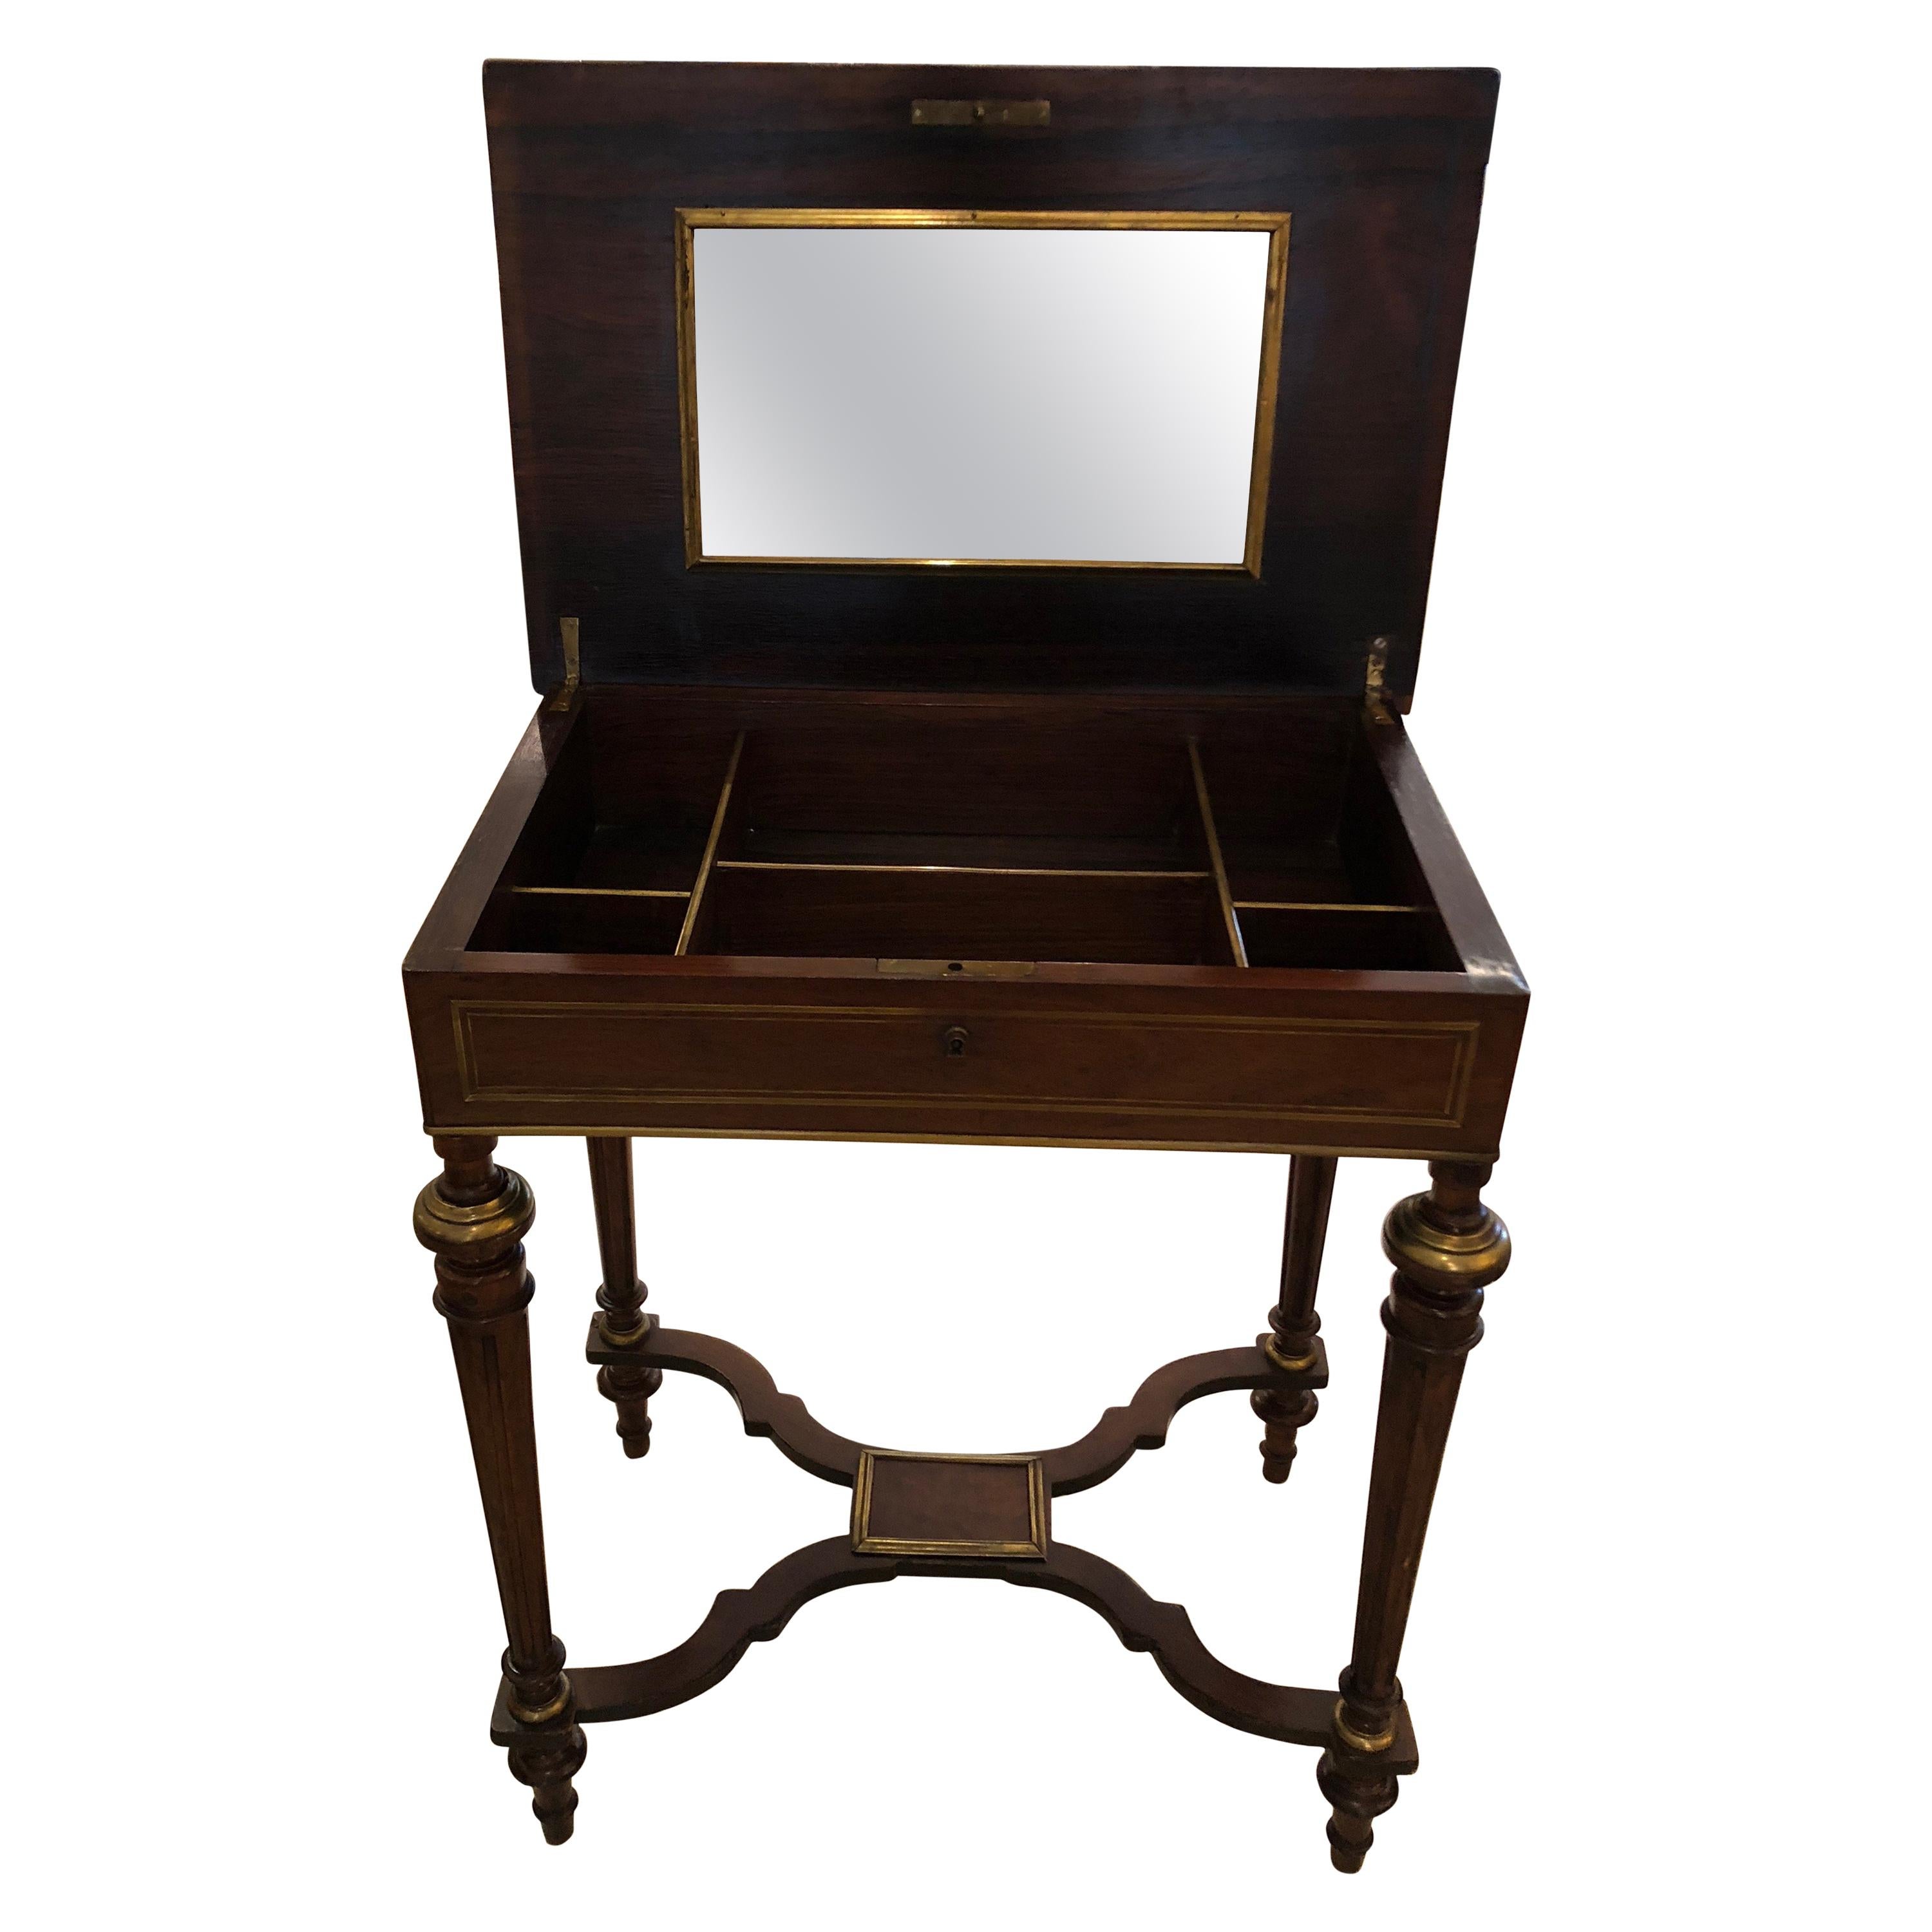 19th Century Mahogany and Brass Inlaid Side Table with Interior Compartments